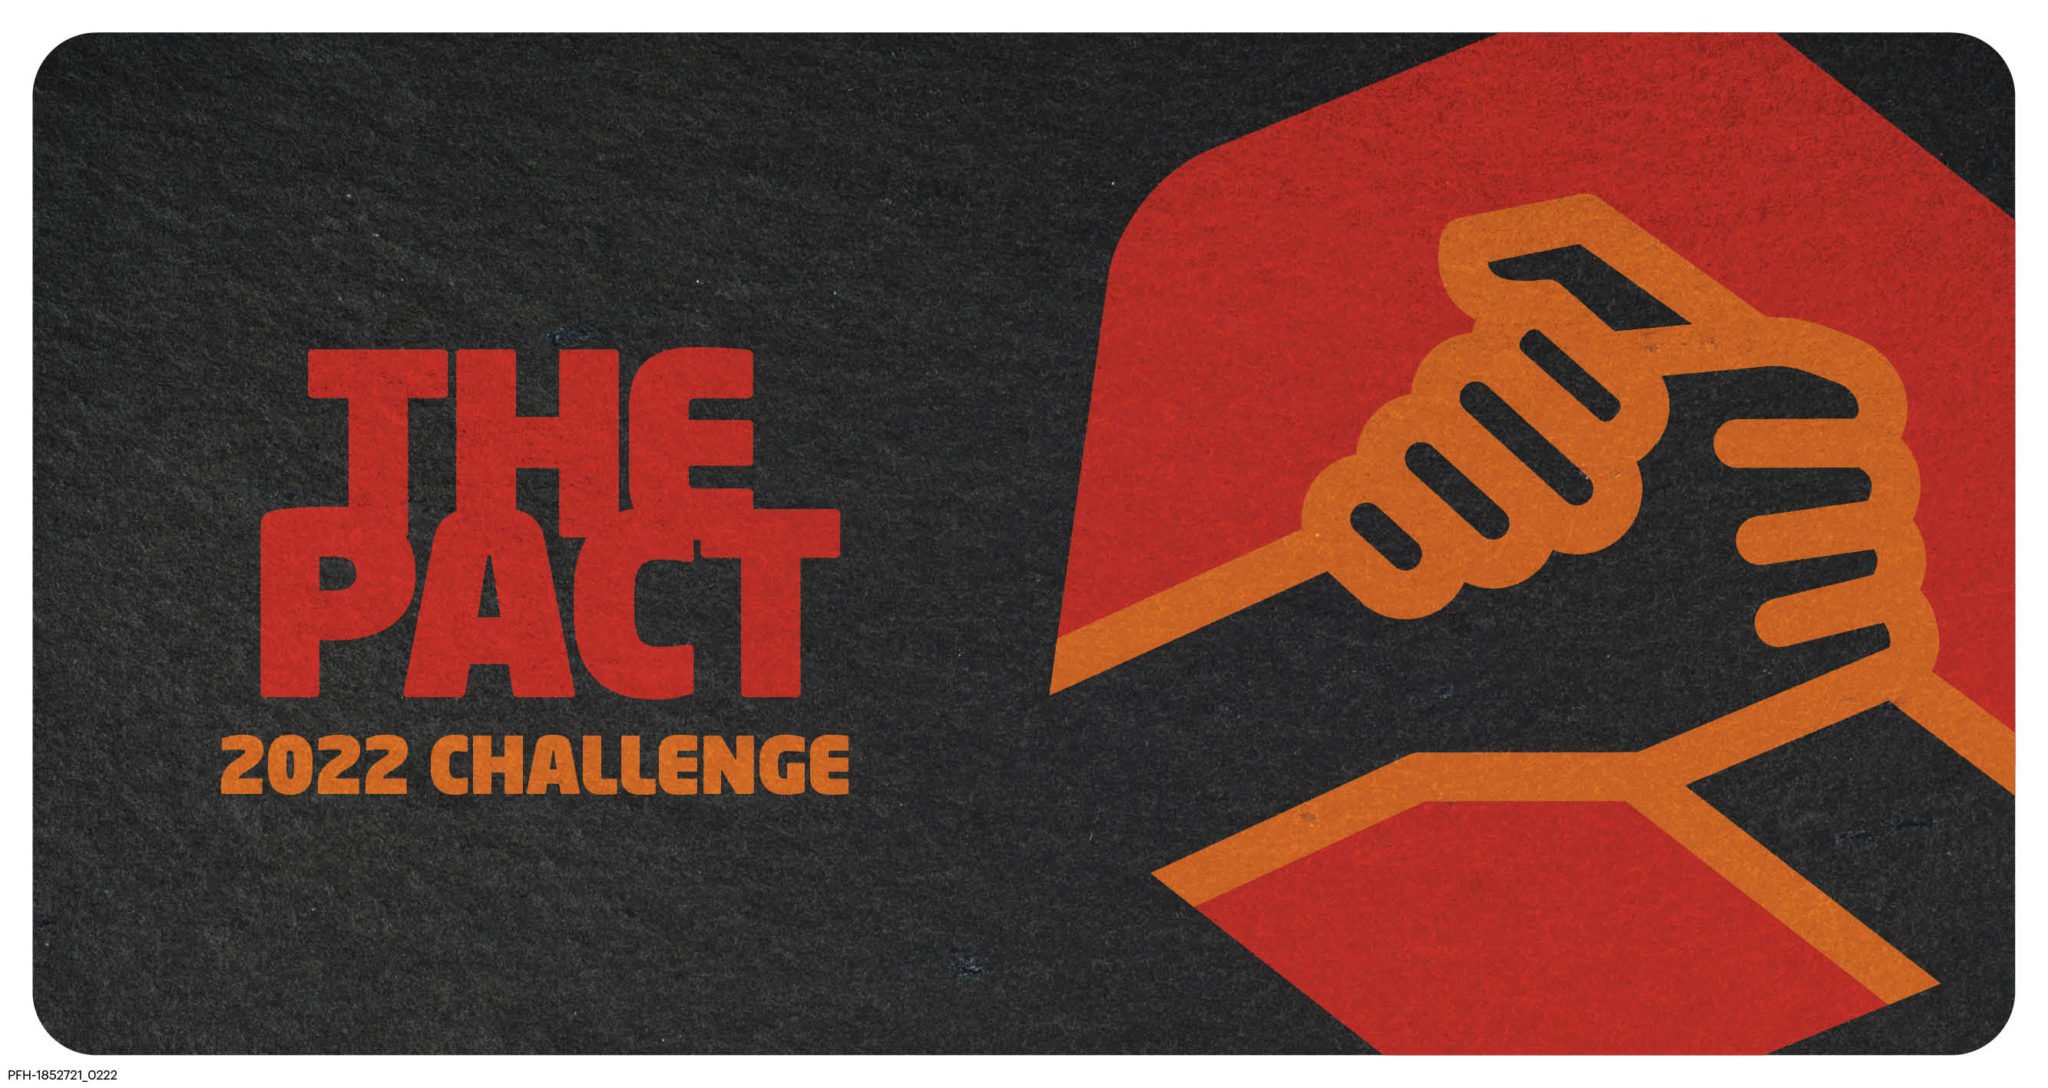 The PACT 2022 Challenge